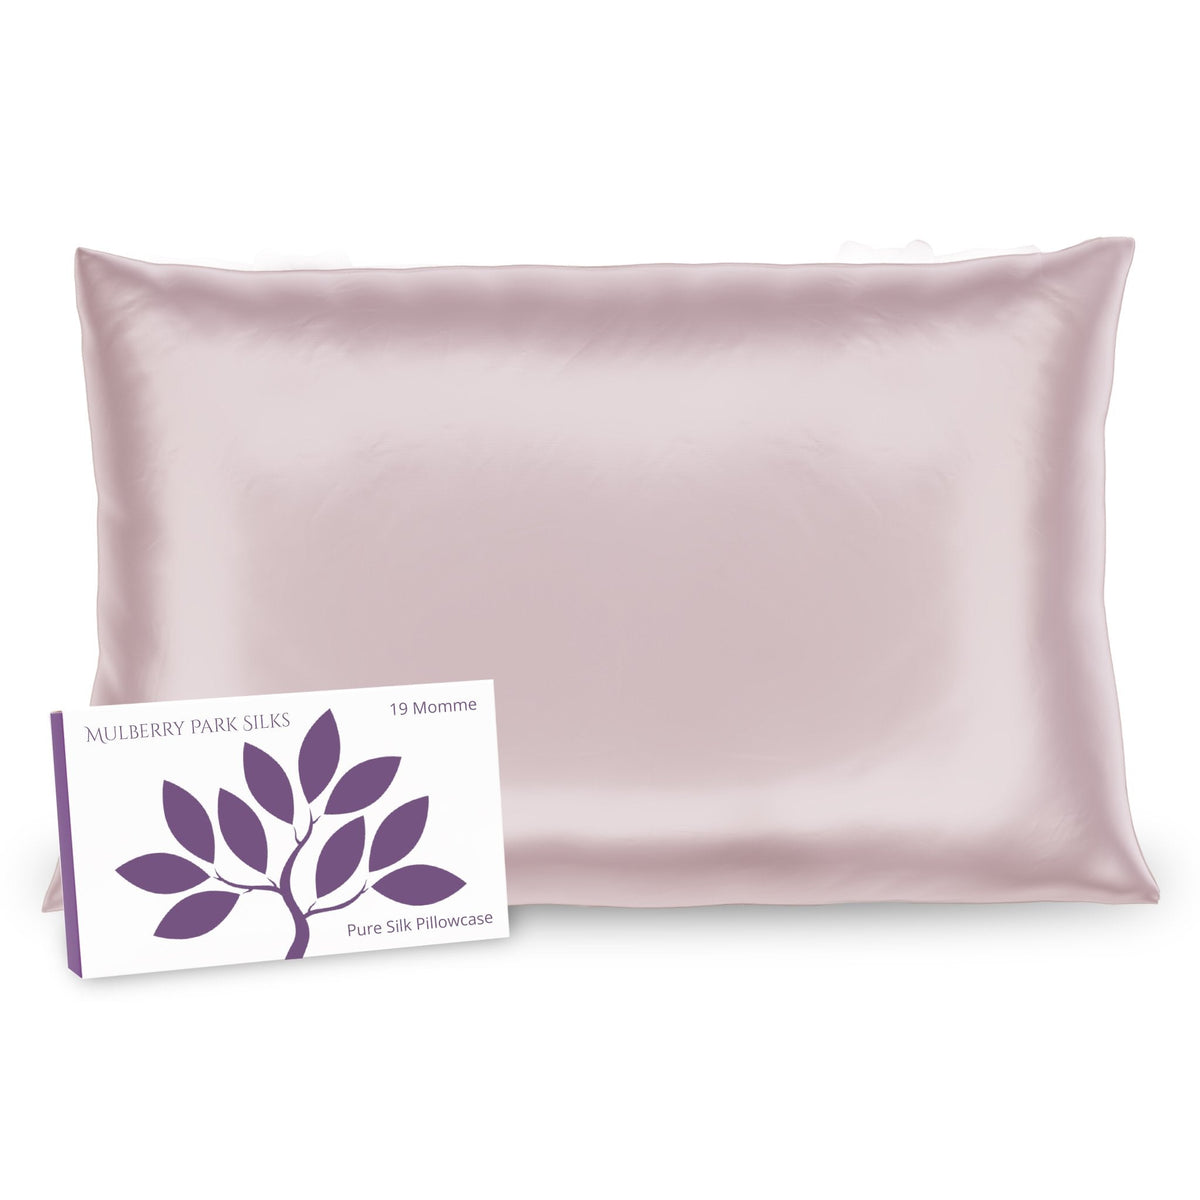 Mulberry Park Silks 19 Momme Pillowcase Pink with box packaging